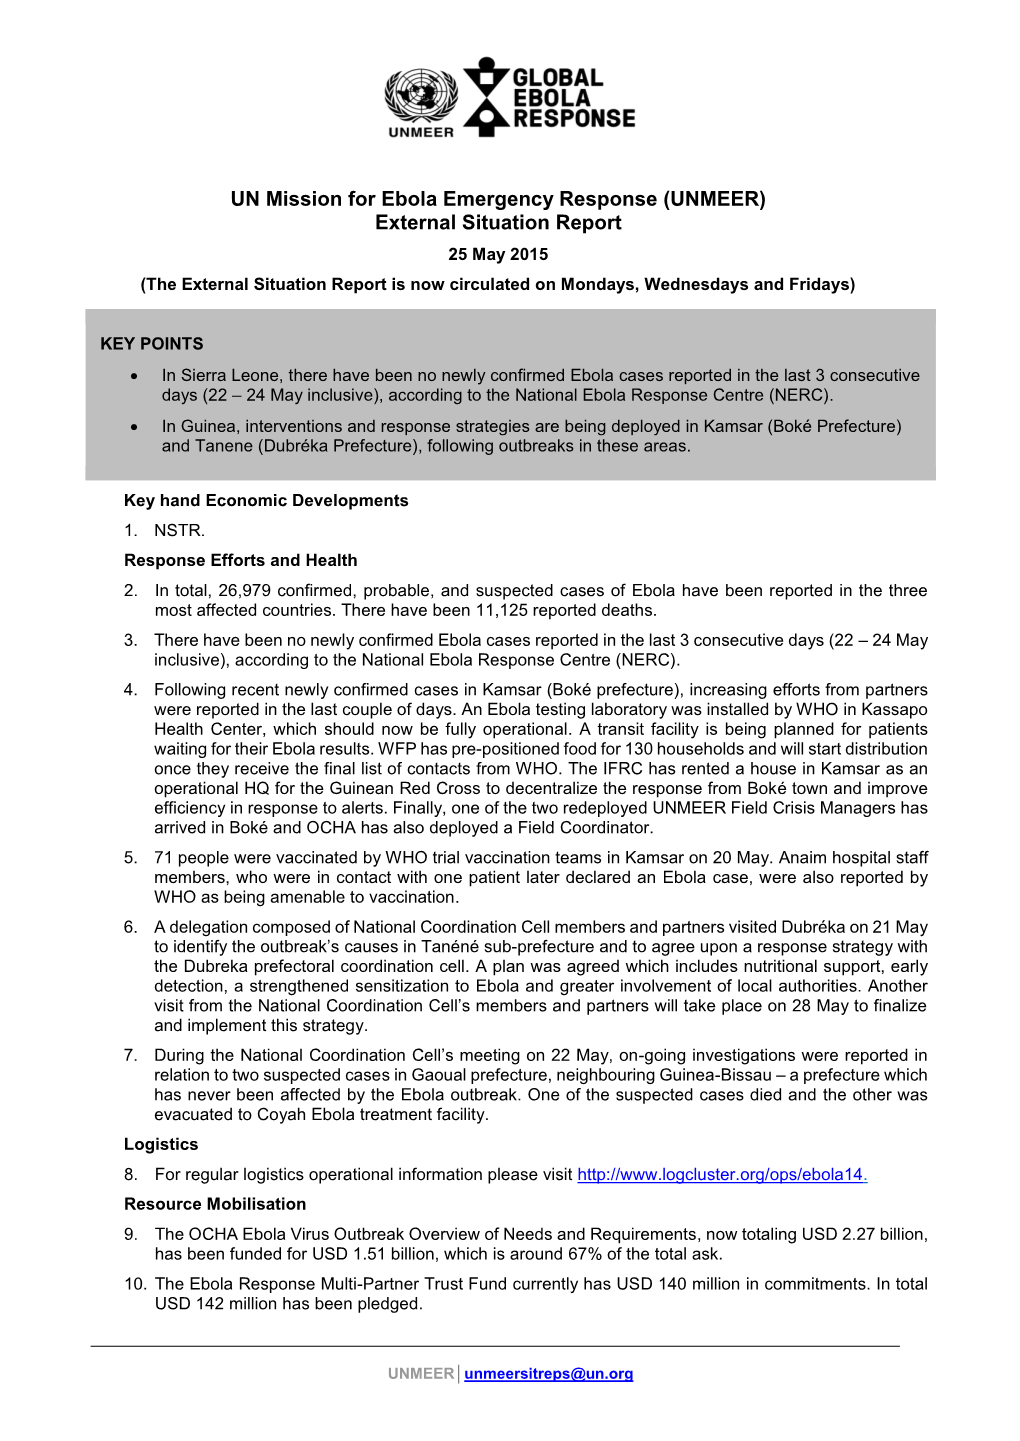 UNMEER) External Situation Report 25 May 2015 (The External Situation Report Is Now Circulated on Mondays, Wednesdays and Fridays)